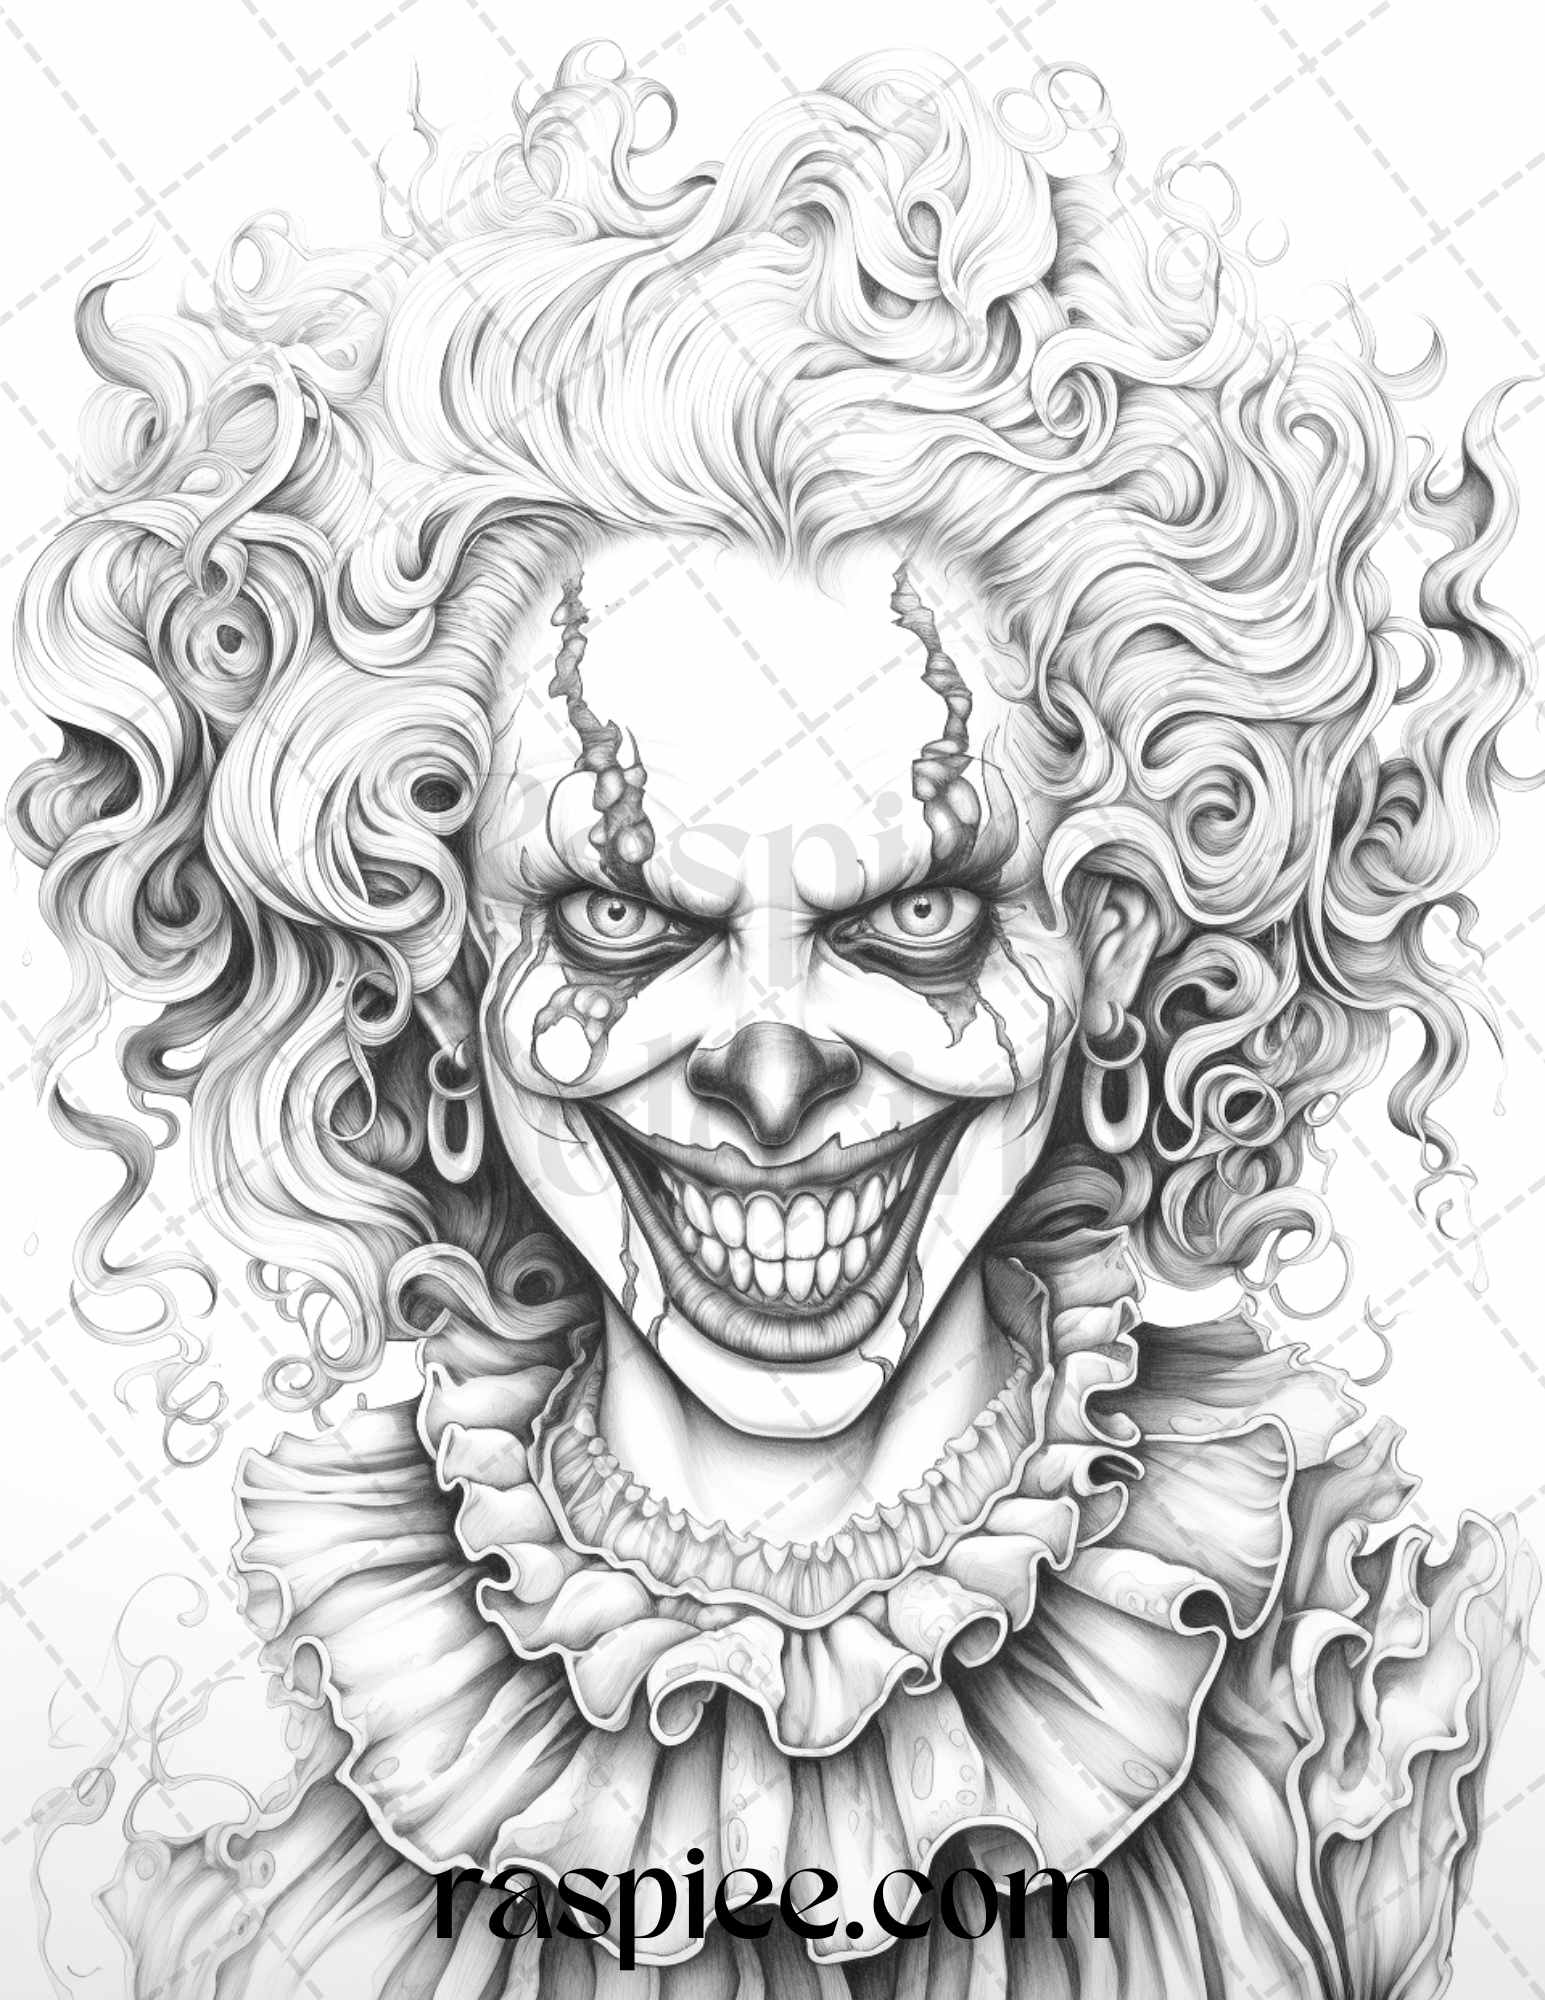 50 Scary Clown Girls Grayscale Coloring Pages Printable for Adults, PDF File Instant Download - raspiee